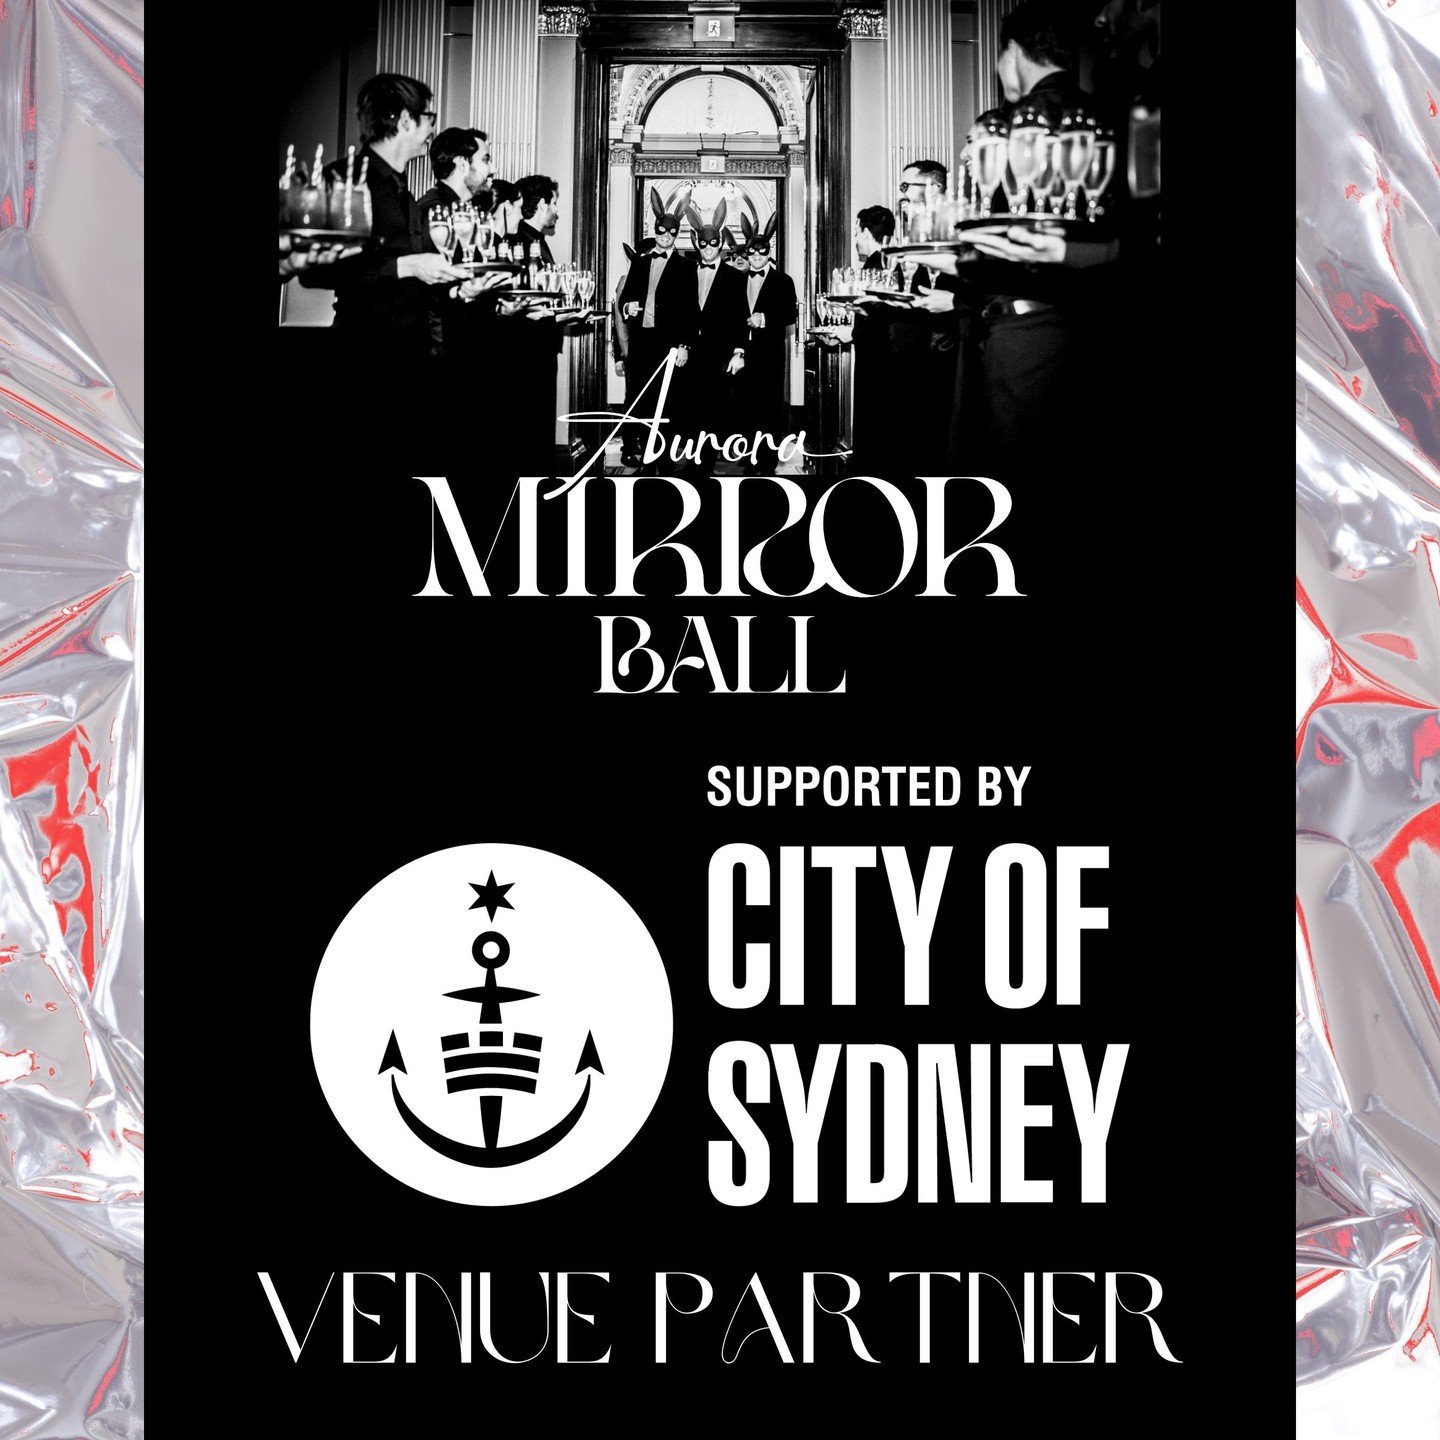 Once again the Aurora Ball will be returning to the grandeur of Sydney Town Hall, and we wouldn't have it any other way! The Aurora Ball is thrilled to have the support of the City of Sydney for another year, as our official Venue Partner, who withou